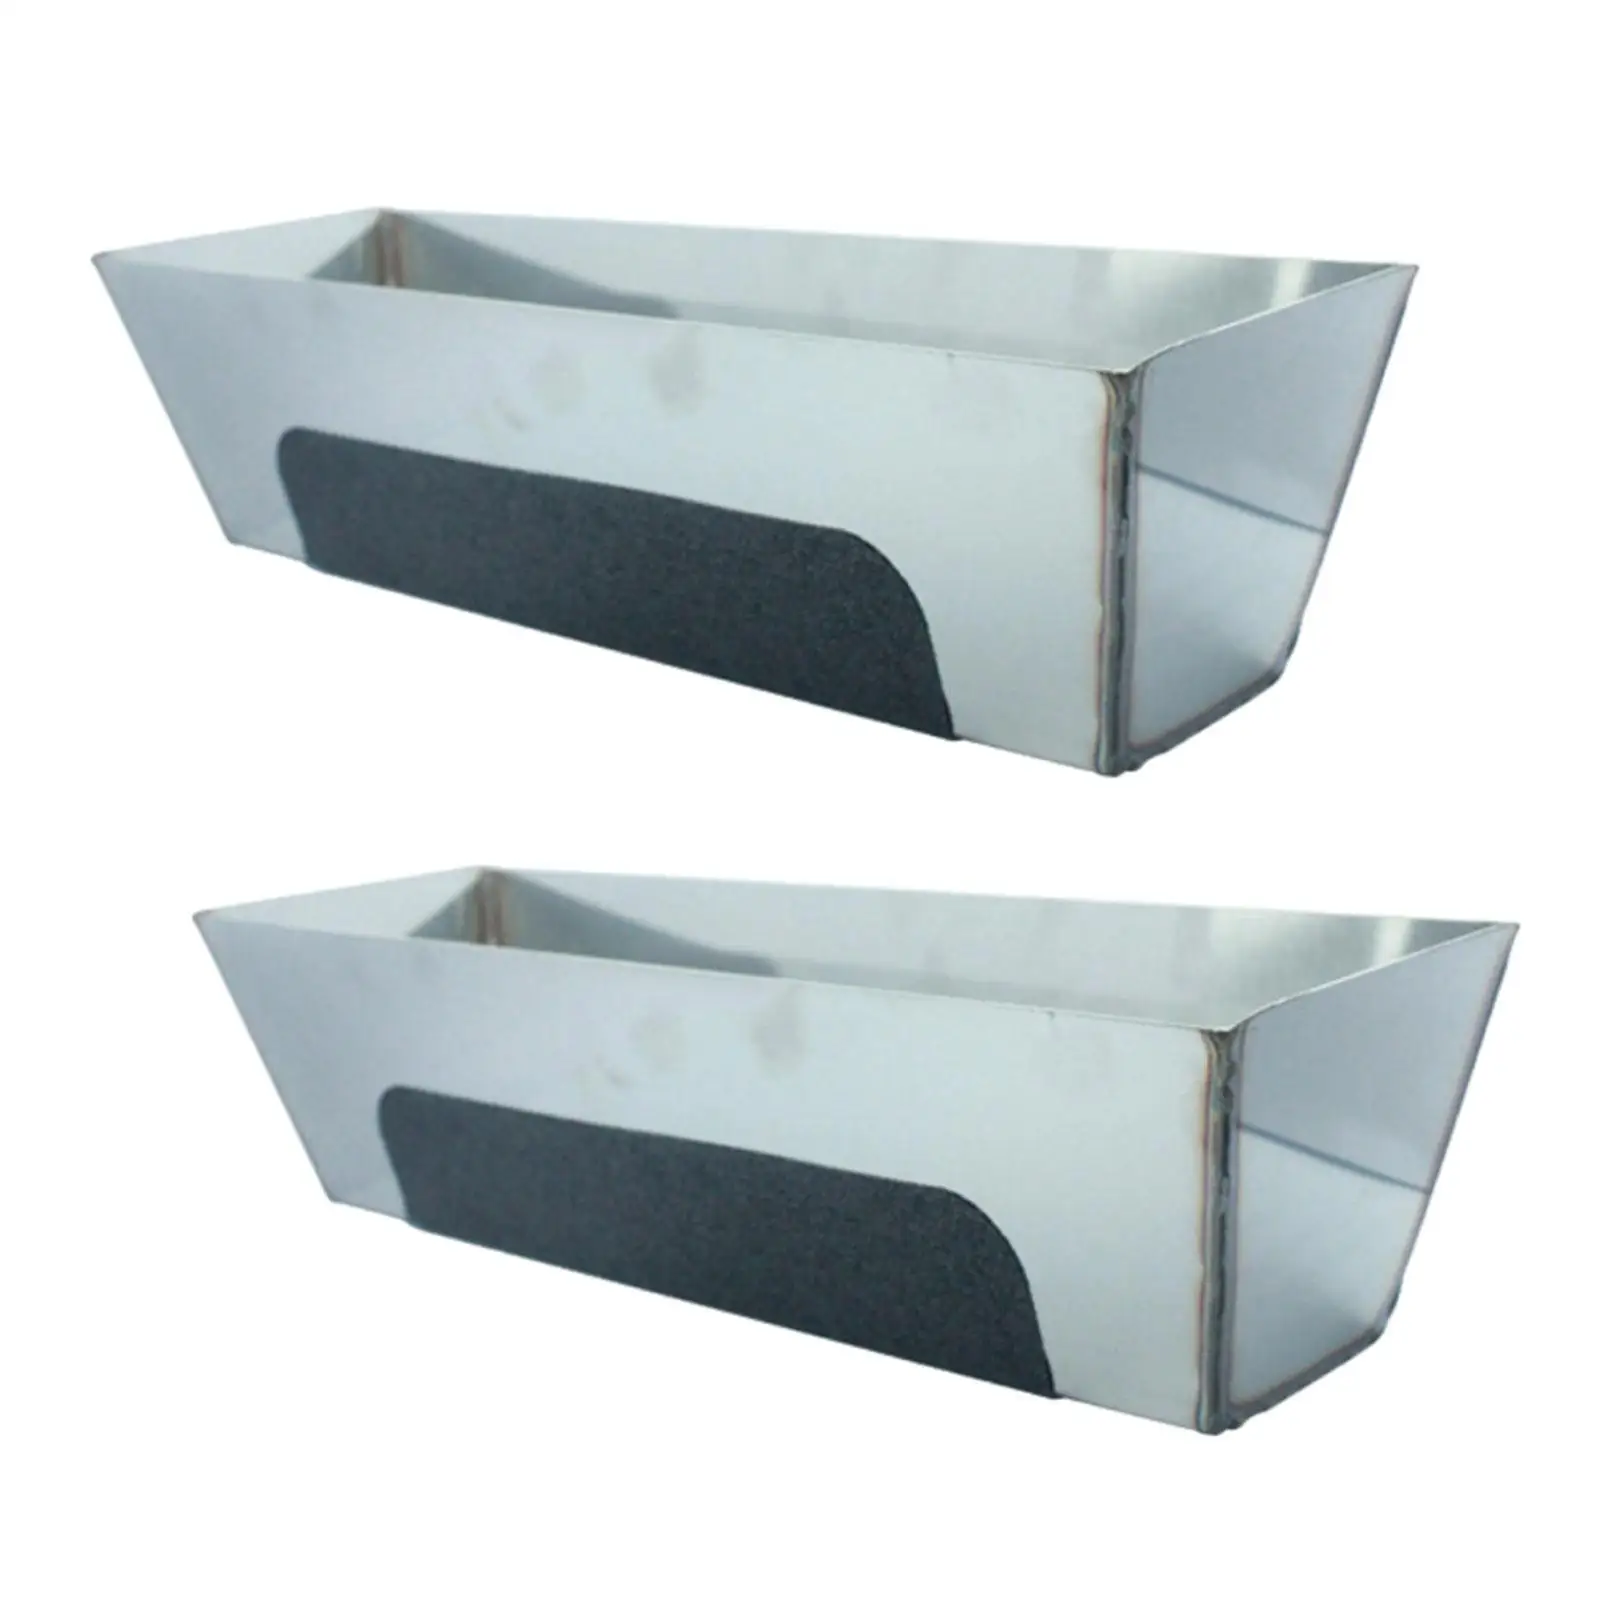 Stainless Steel Mud Pan Sturdy Accessories Lightweight Sheared Edges Tray Bucket Anti Slip Metal Mud Pan for Easy Knife Cleaning